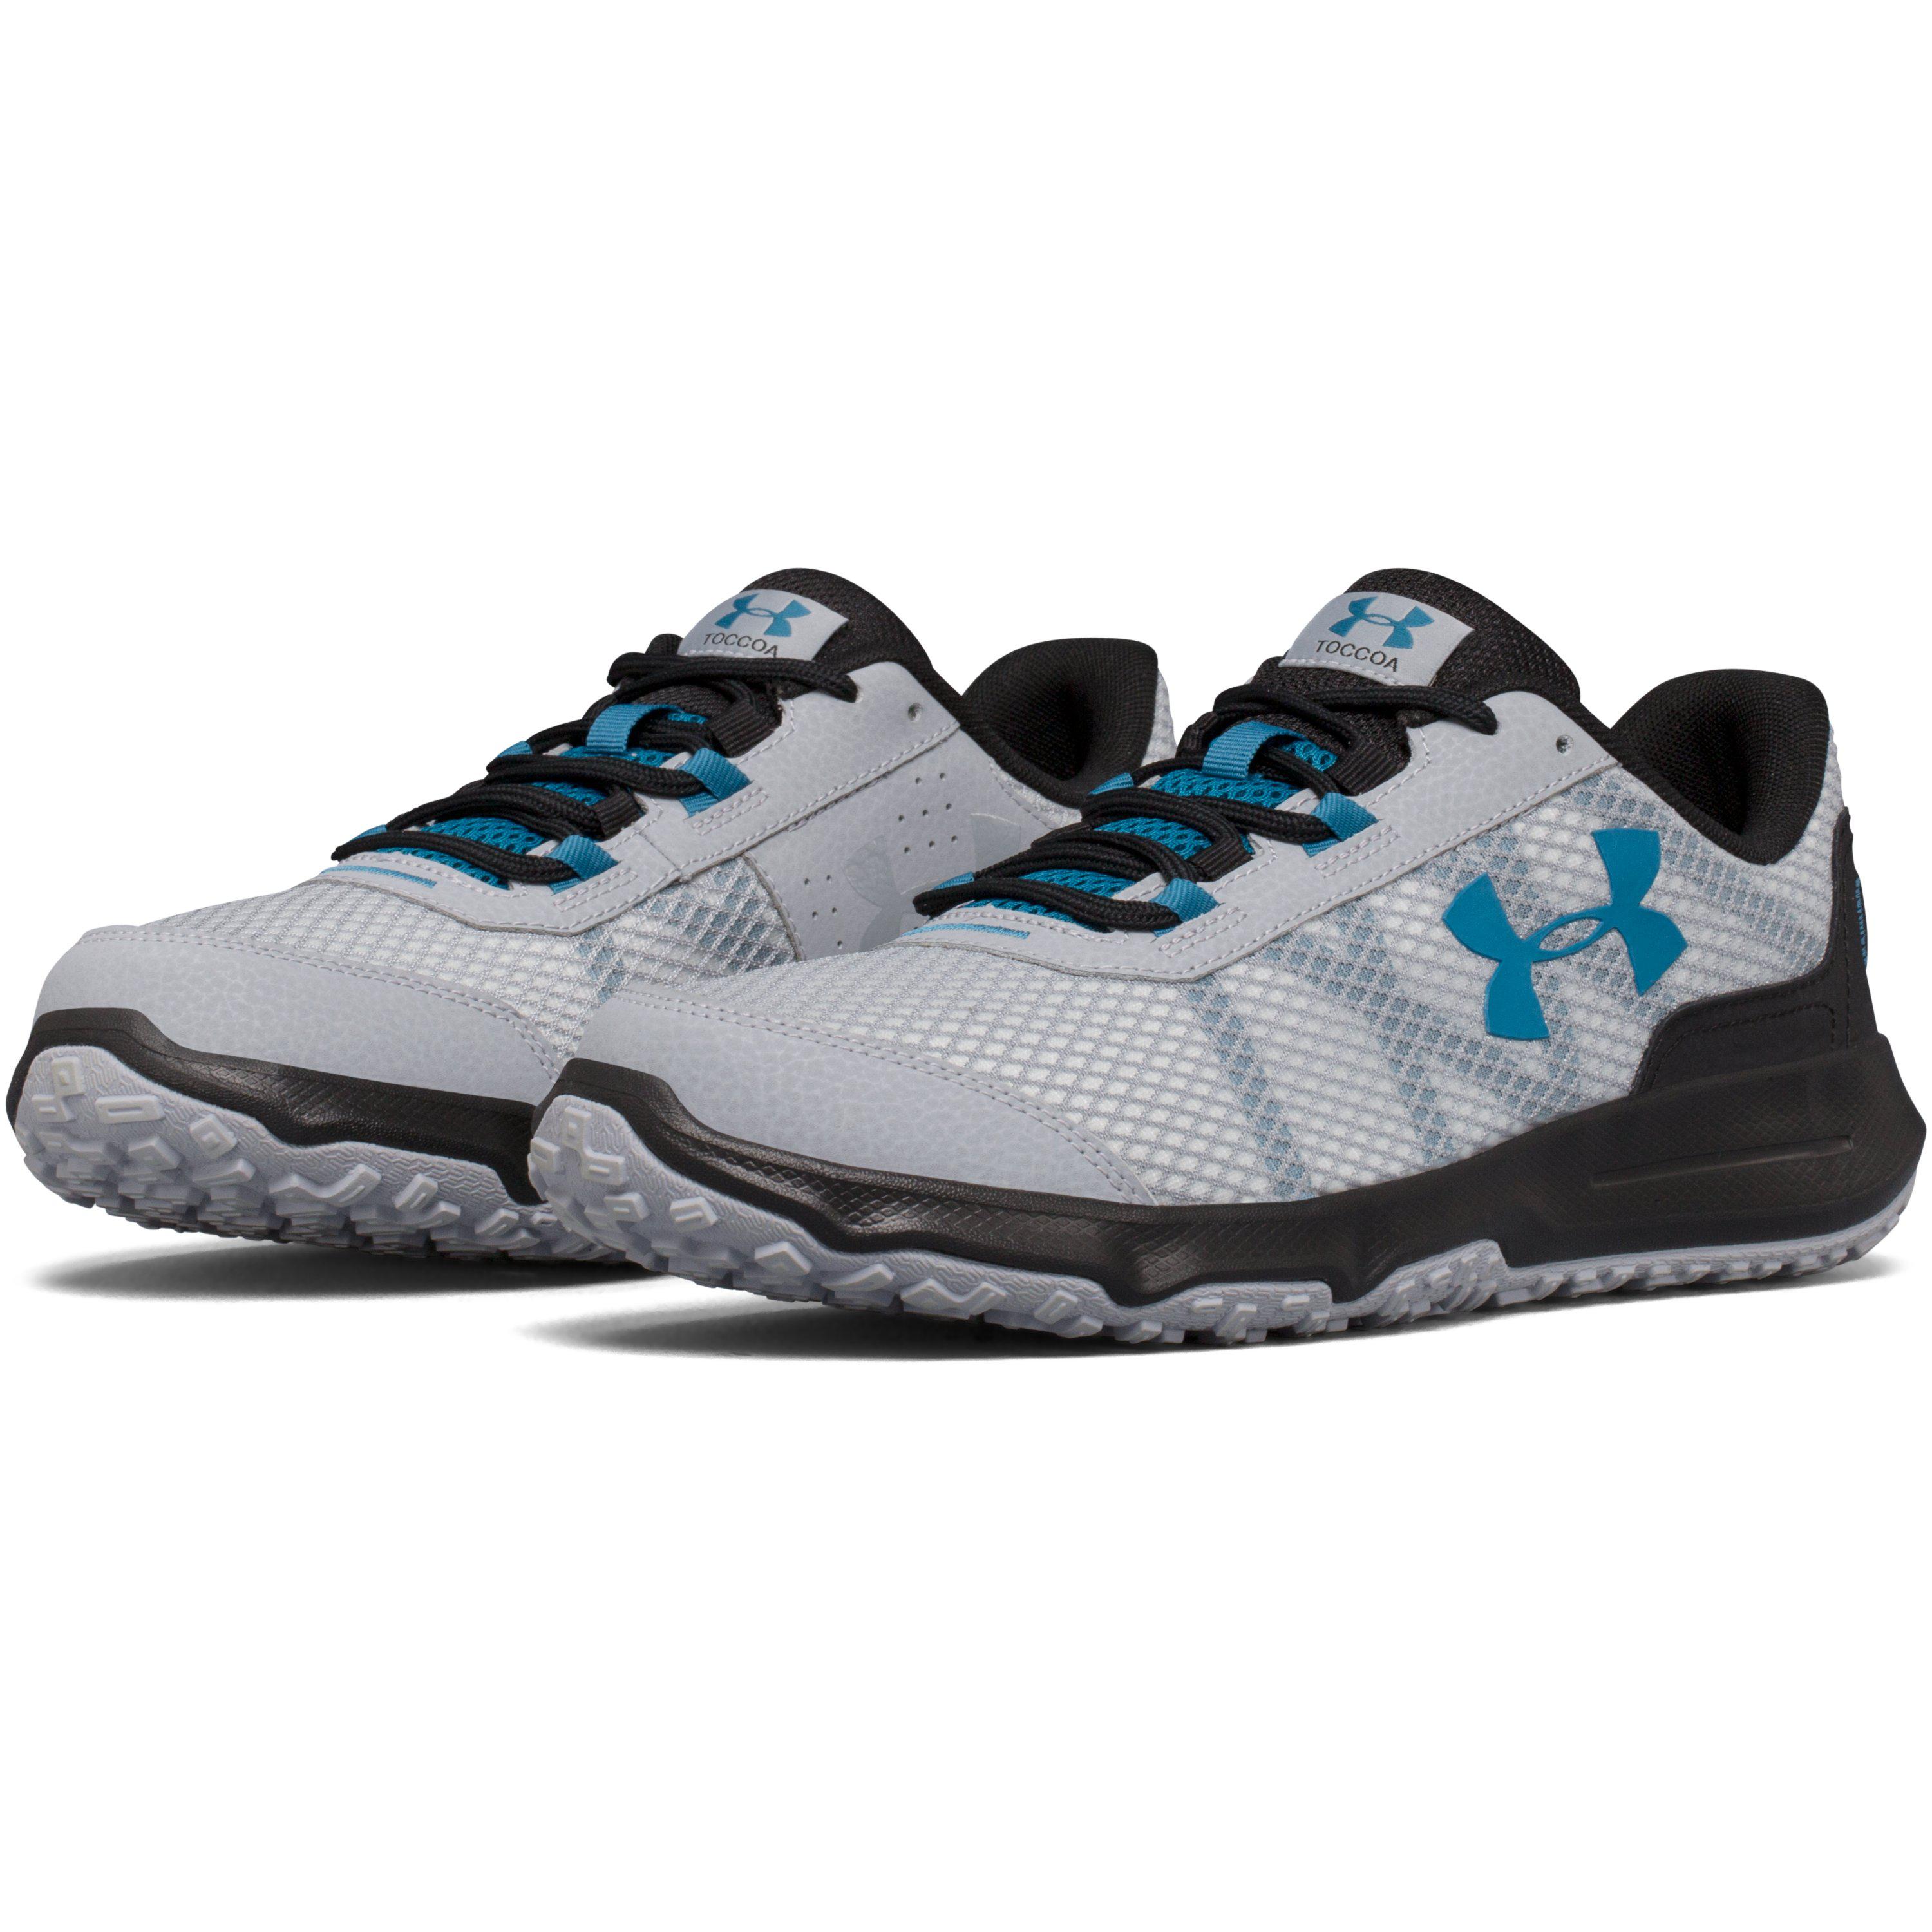 Under Armour Men's Ua Toccoa Running Shoes in Black for Men - Lyst